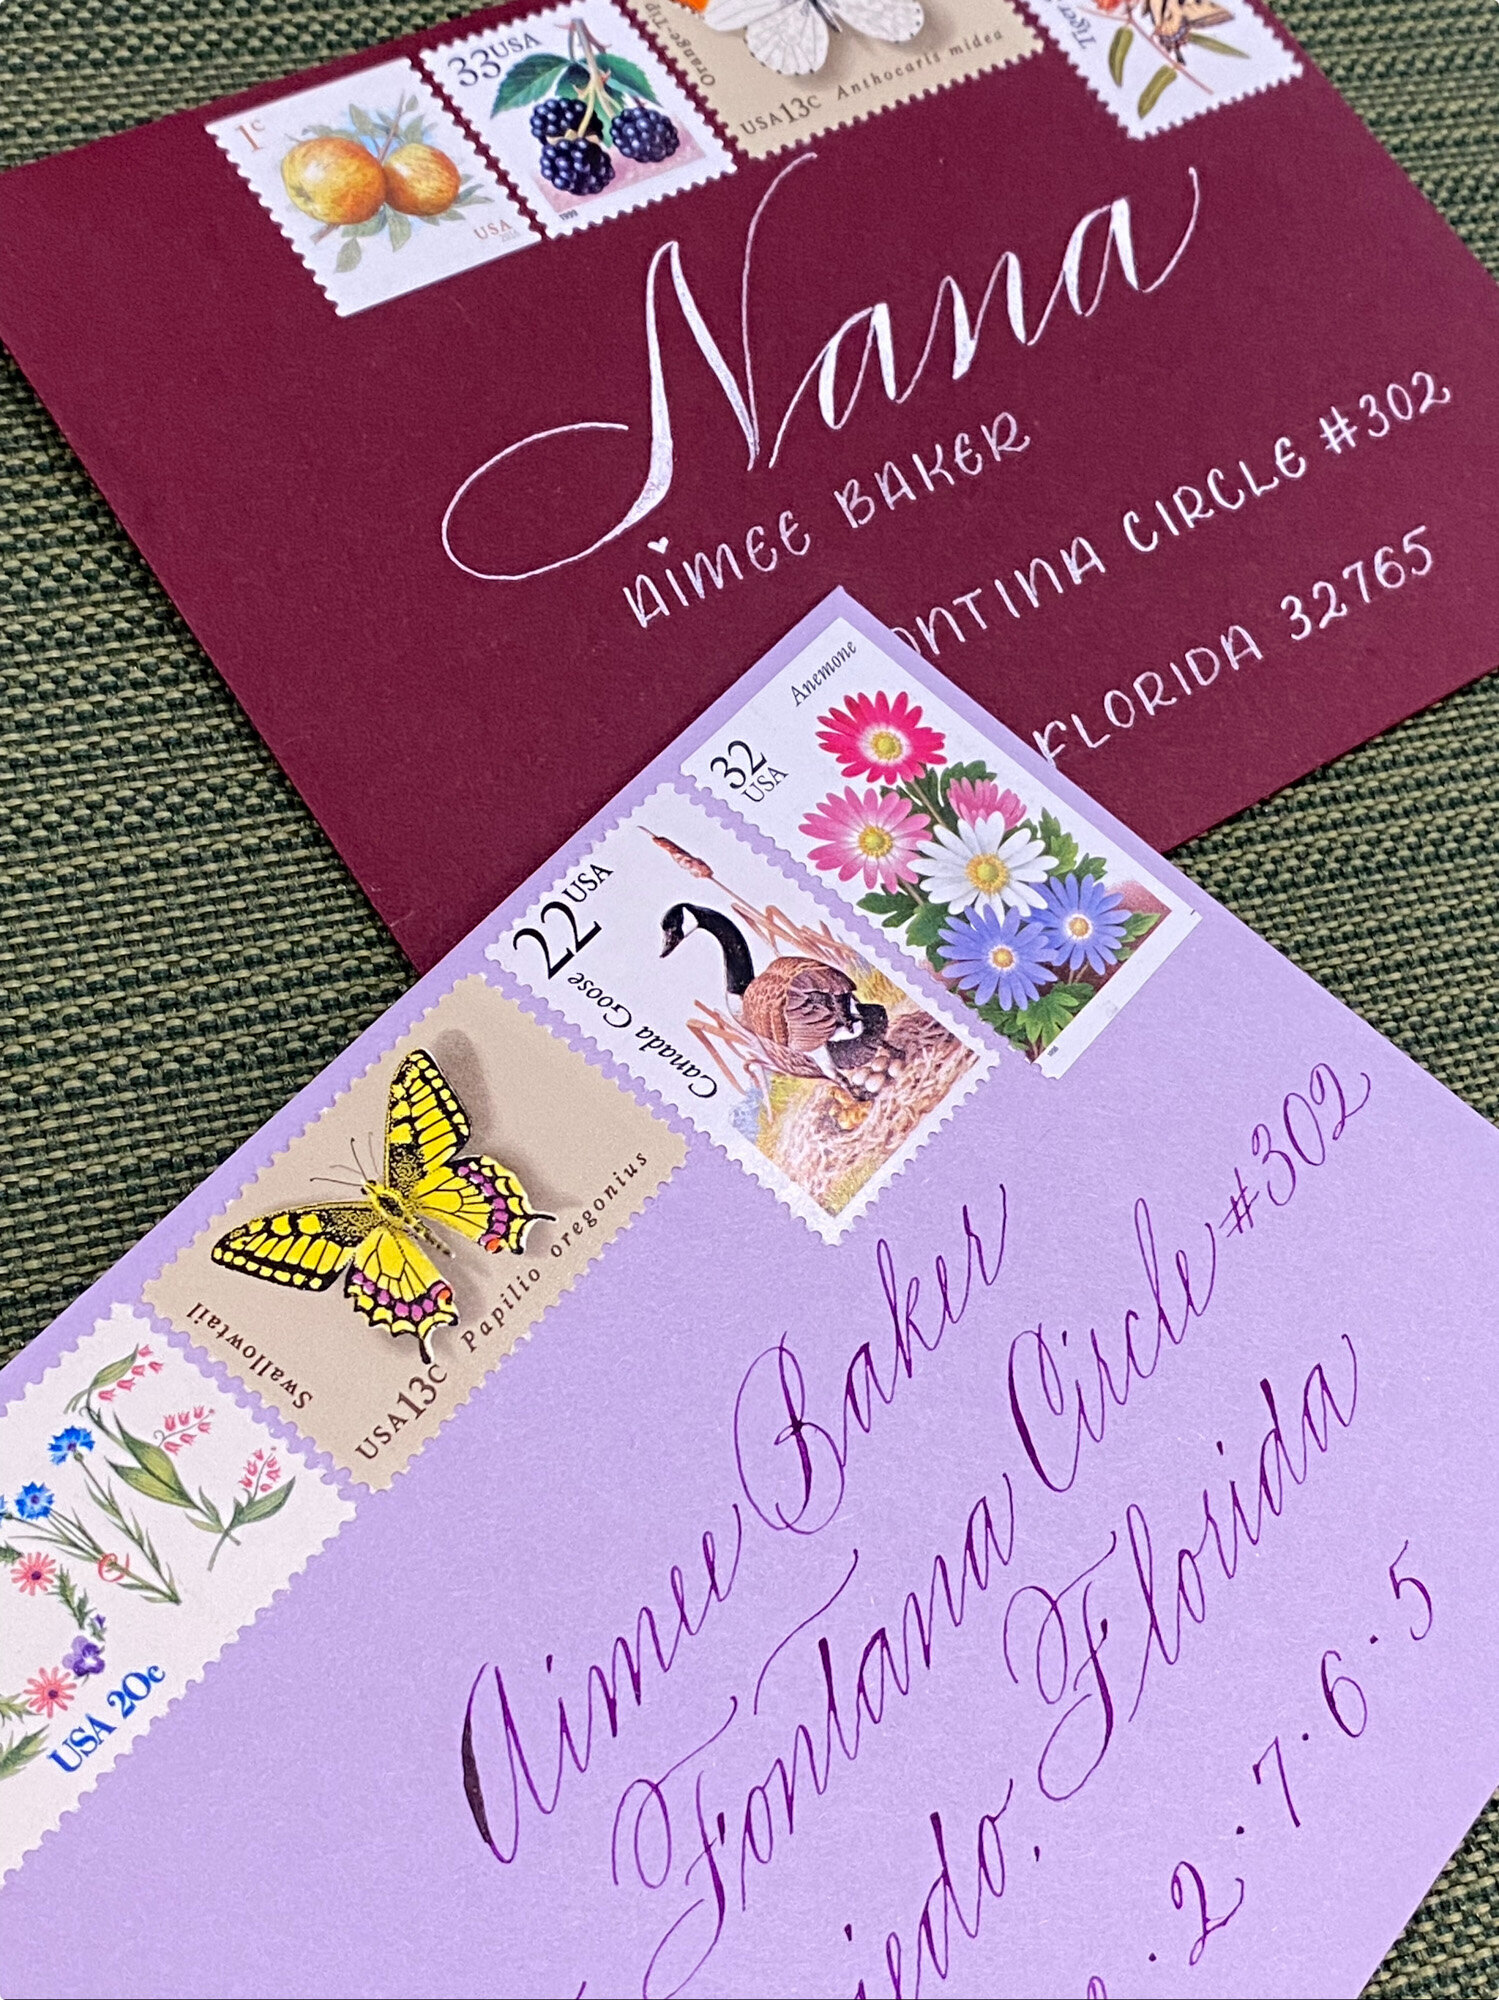 Elegant envelope with custom calligraphy with stamps